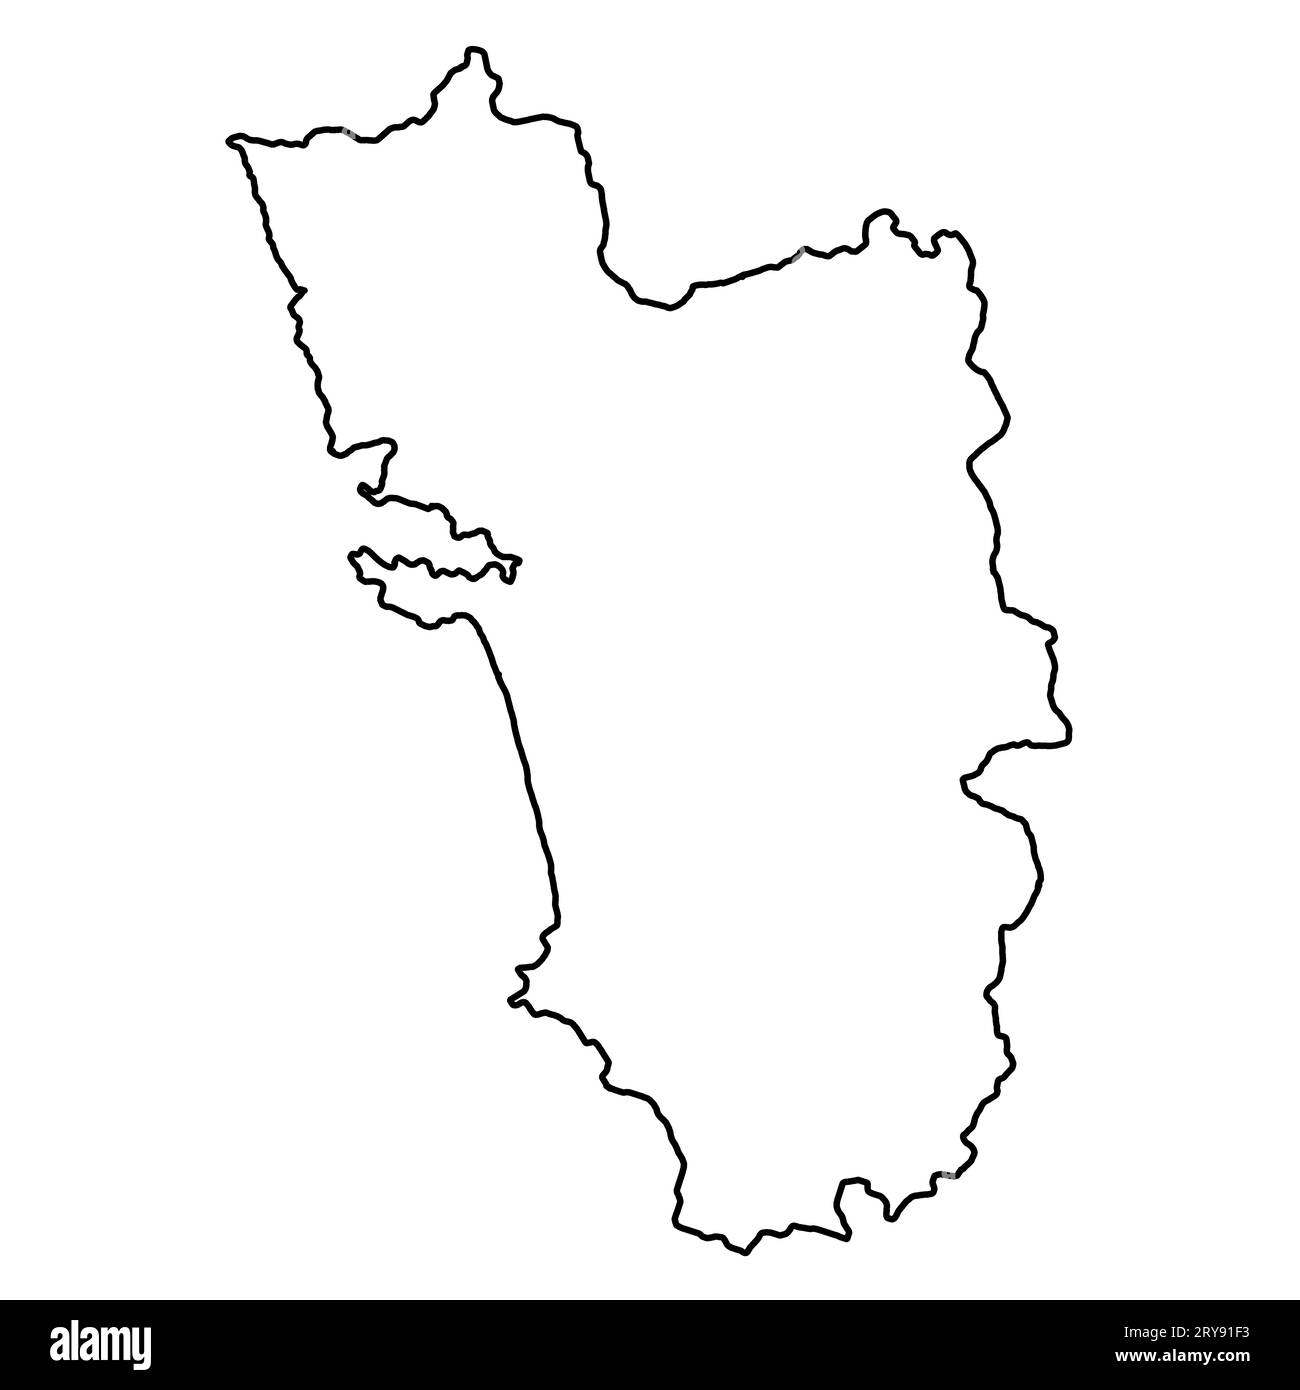 Goa, India Map Black Silhouette and Outline Isolated on white background. Stock Photo